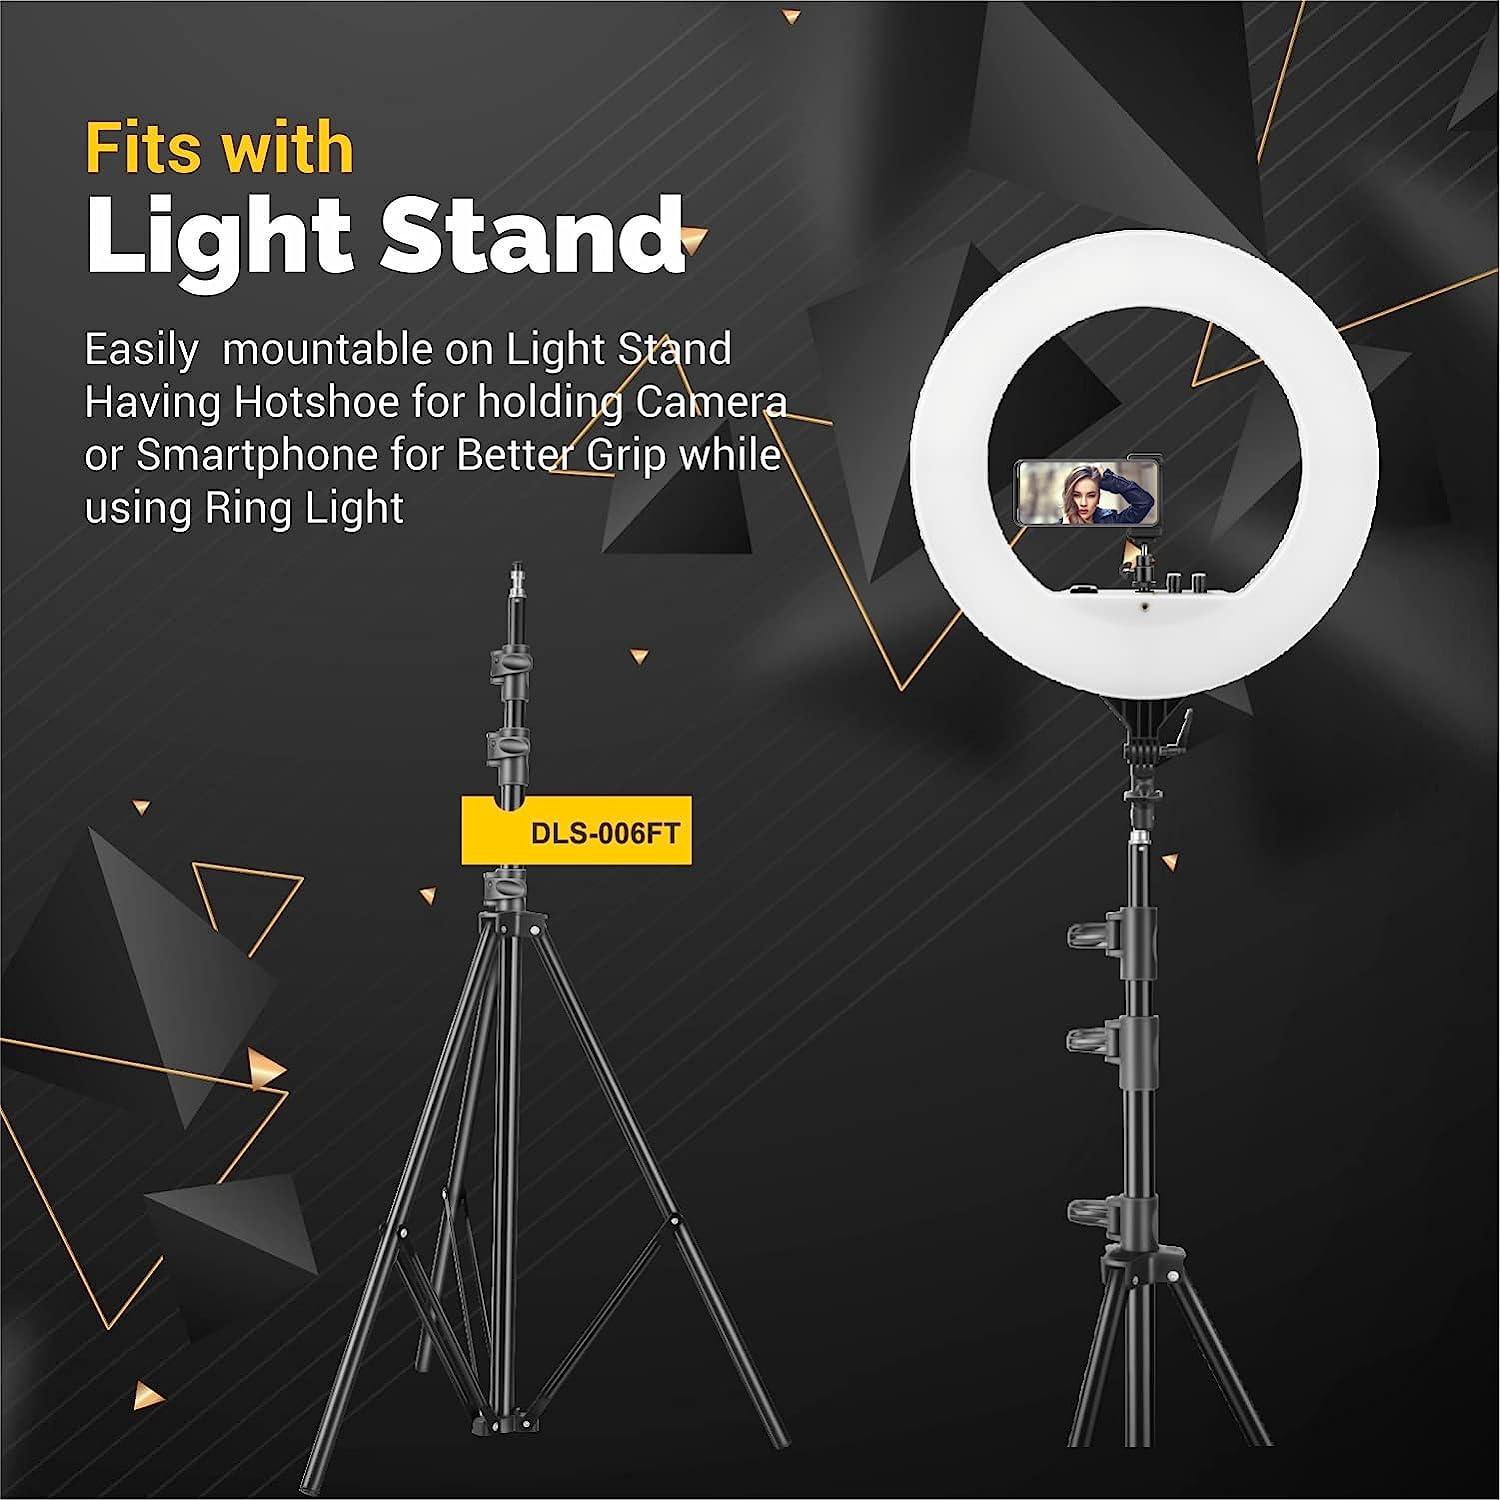 Digitek (DRL-18RT C6) Professional 46cm LED Ring Light with Remote & 158cm Light Stand, Runs on AC Power with No Shadow apertures, Ideal use for Makeup, Video Shoot, Fashion Photography & Many More - Digitek